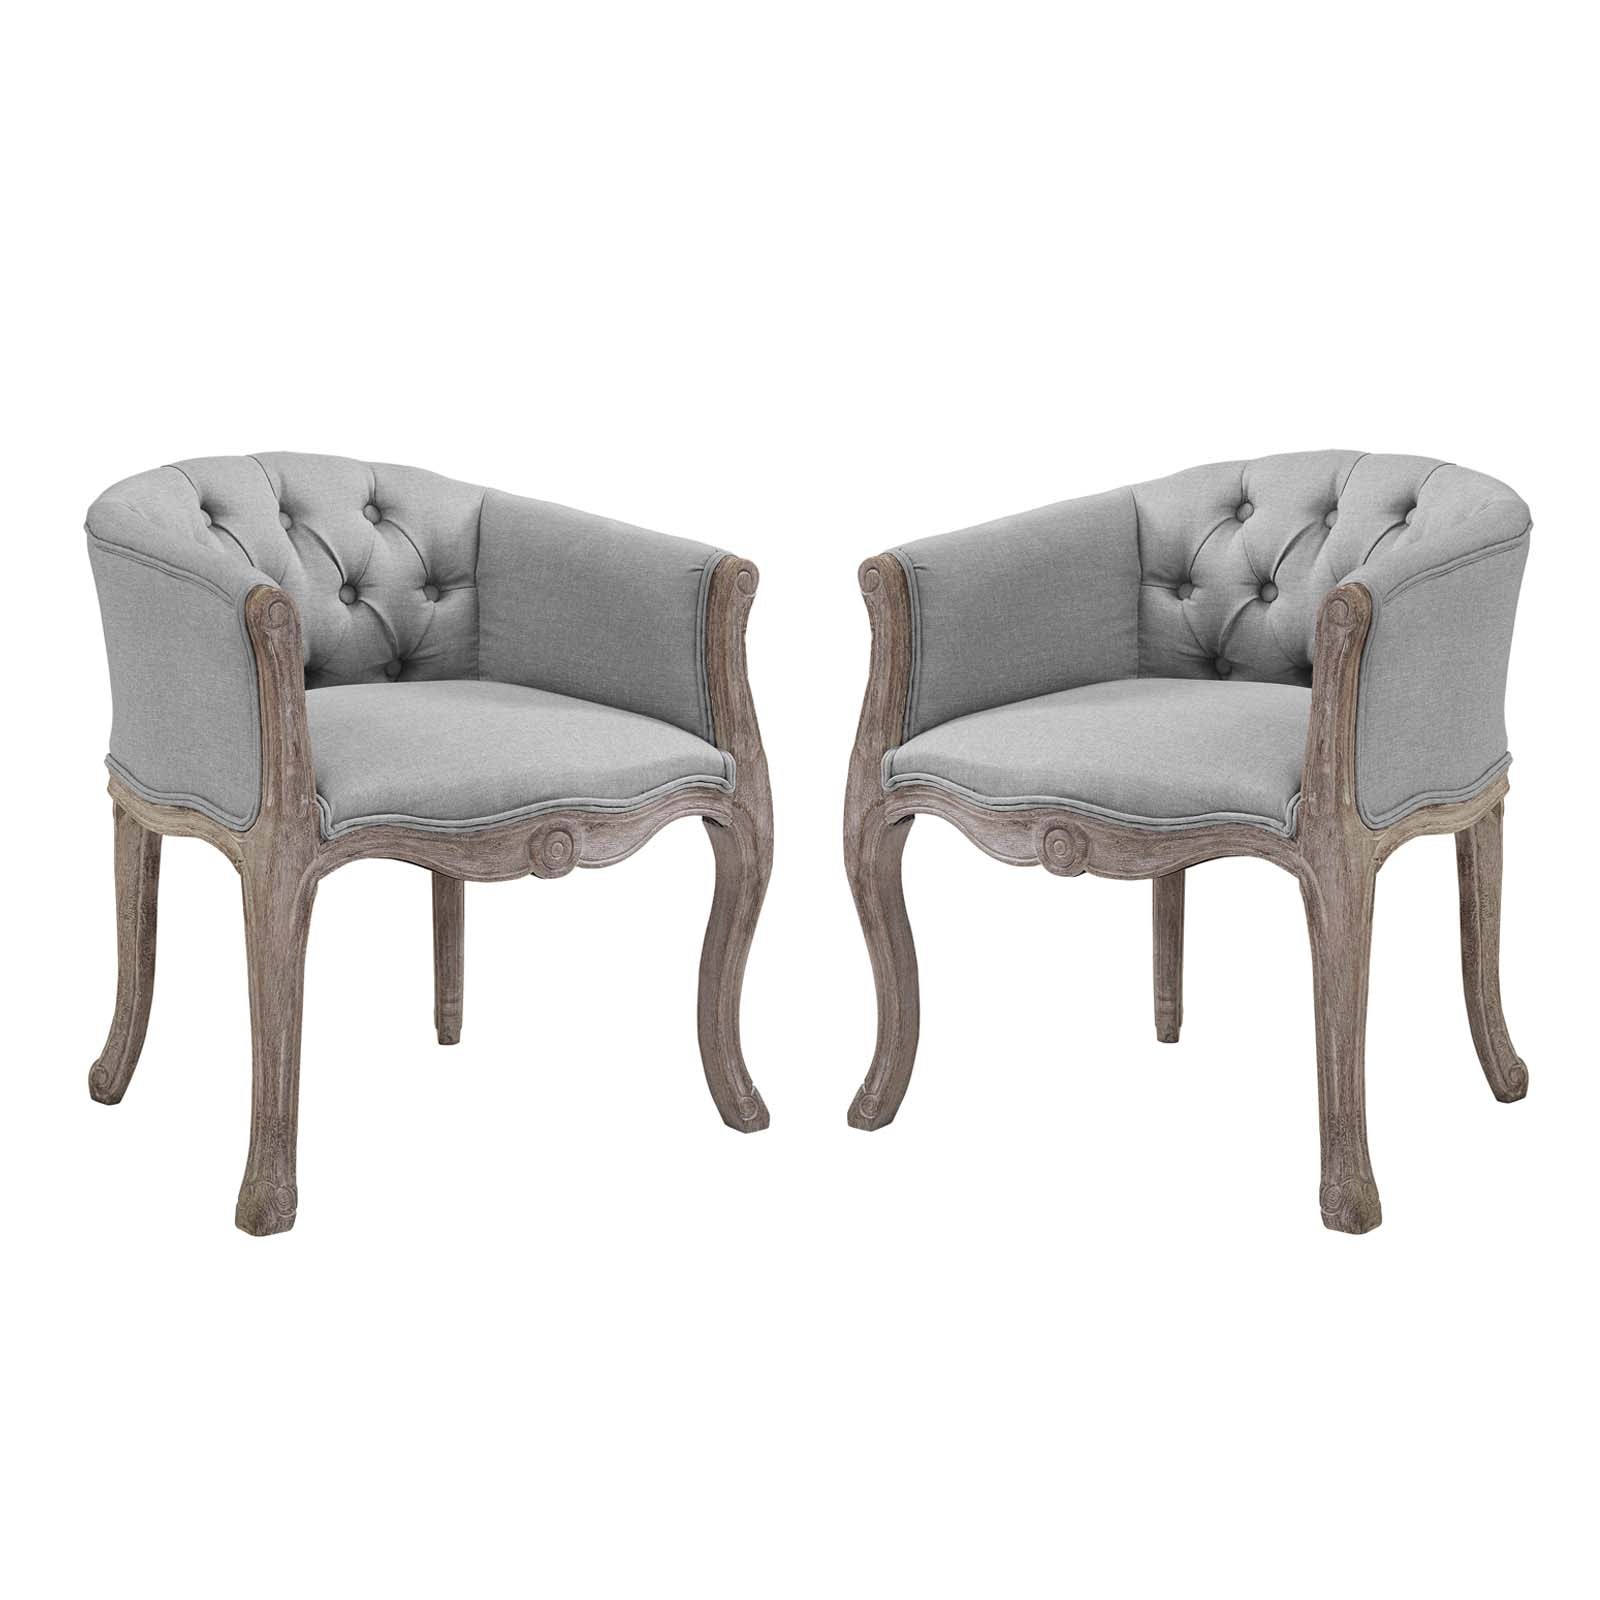 Crown Vintage French Upholstered Fabric Dining Armchair Set of 2 - East Shore Modern Home Furnishings